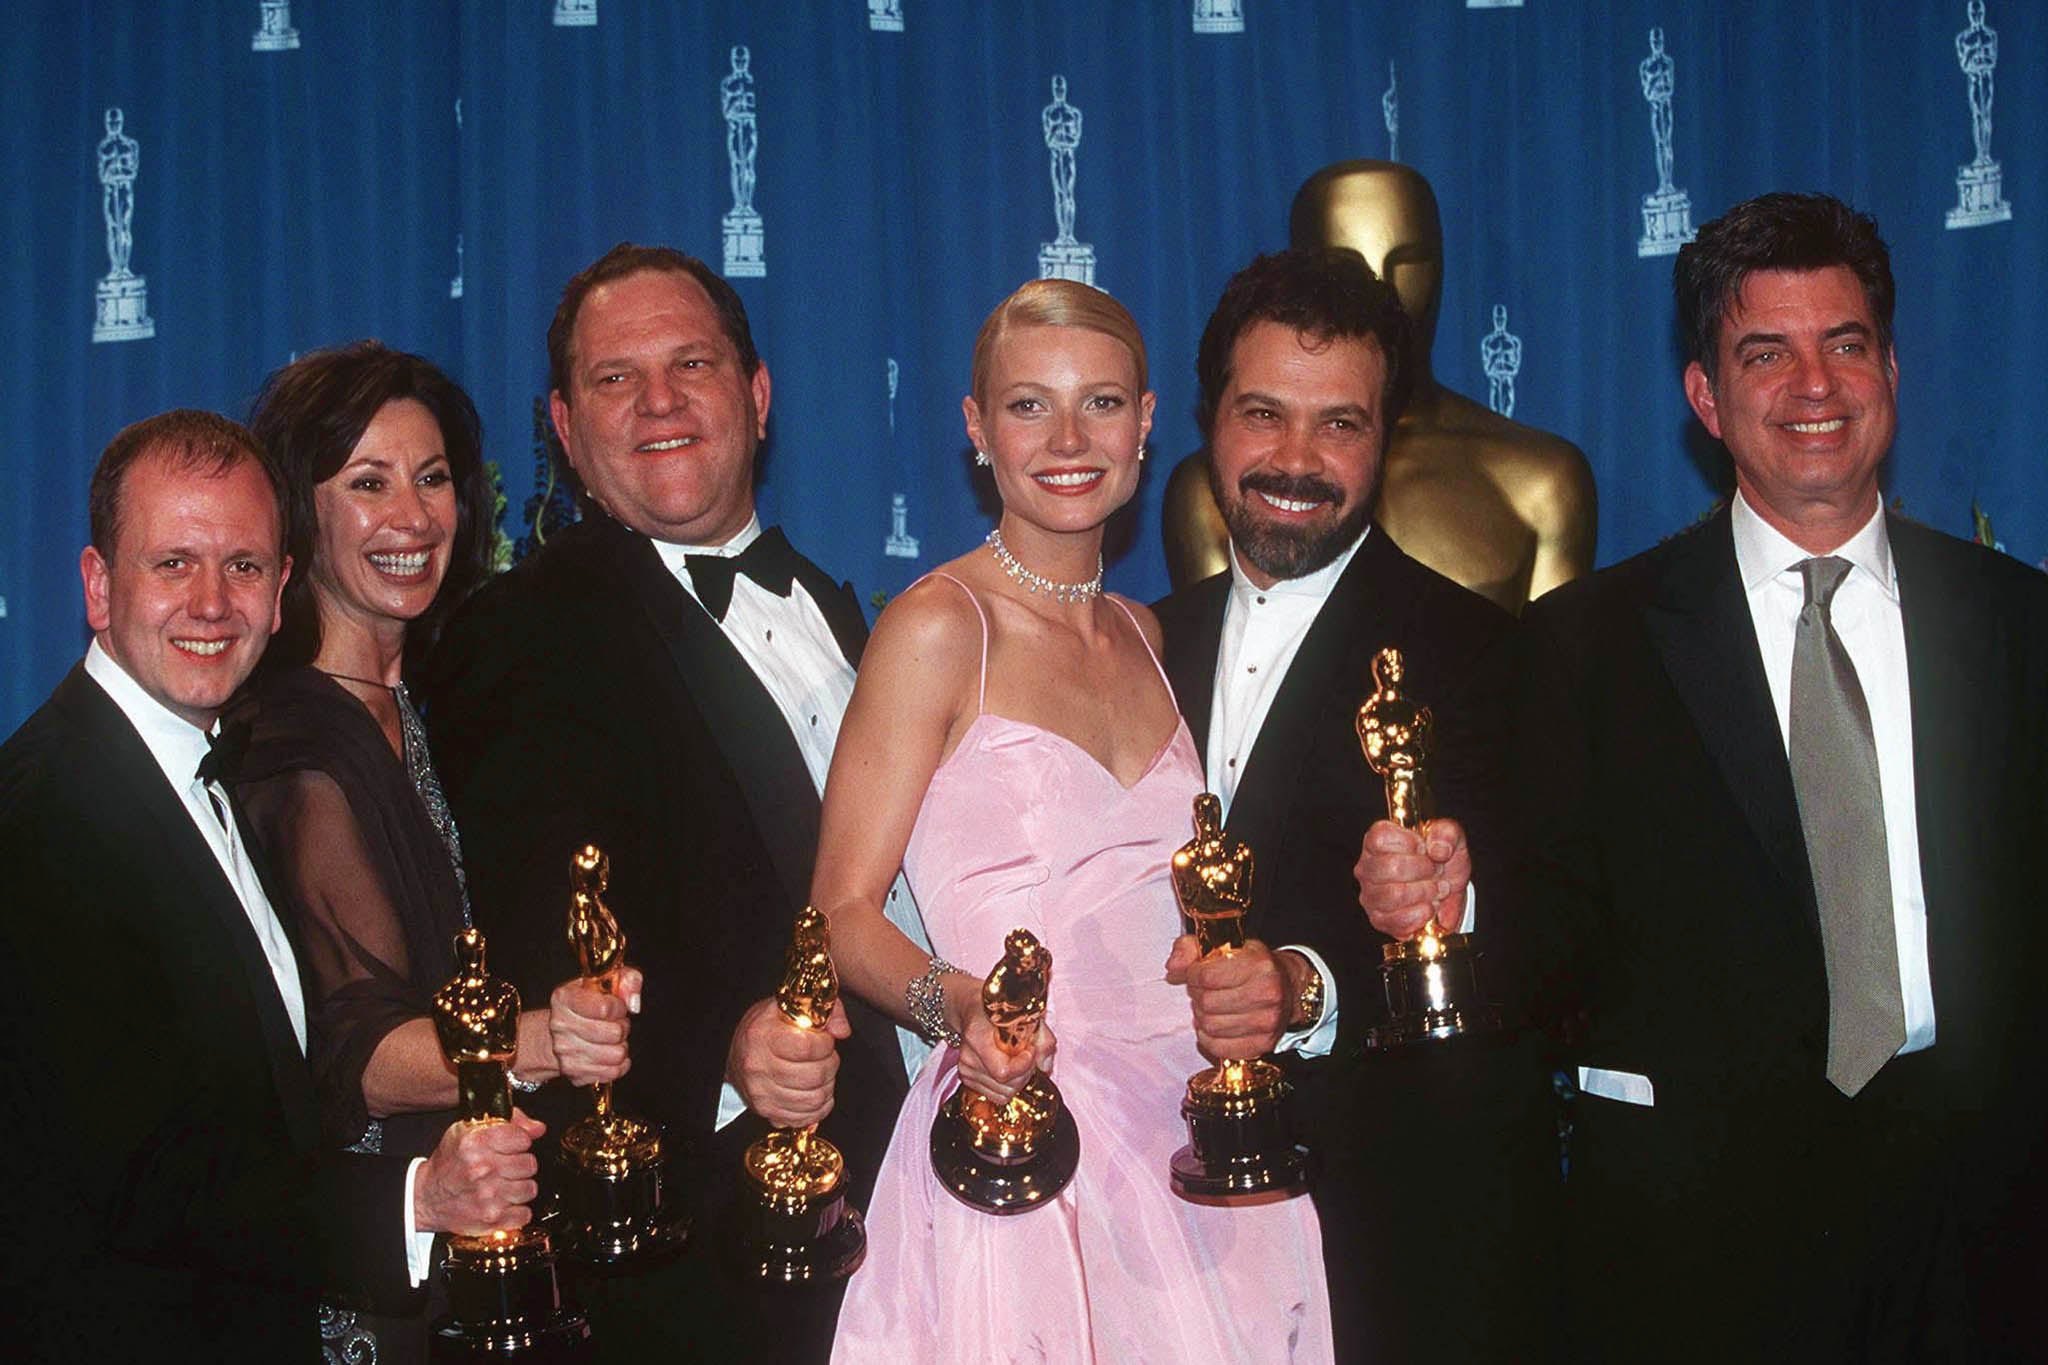 Shakespearean scandal: The team behind 1998’s ‘Shakespeare in Love’ celebrate their wins at the 1999 Oscars